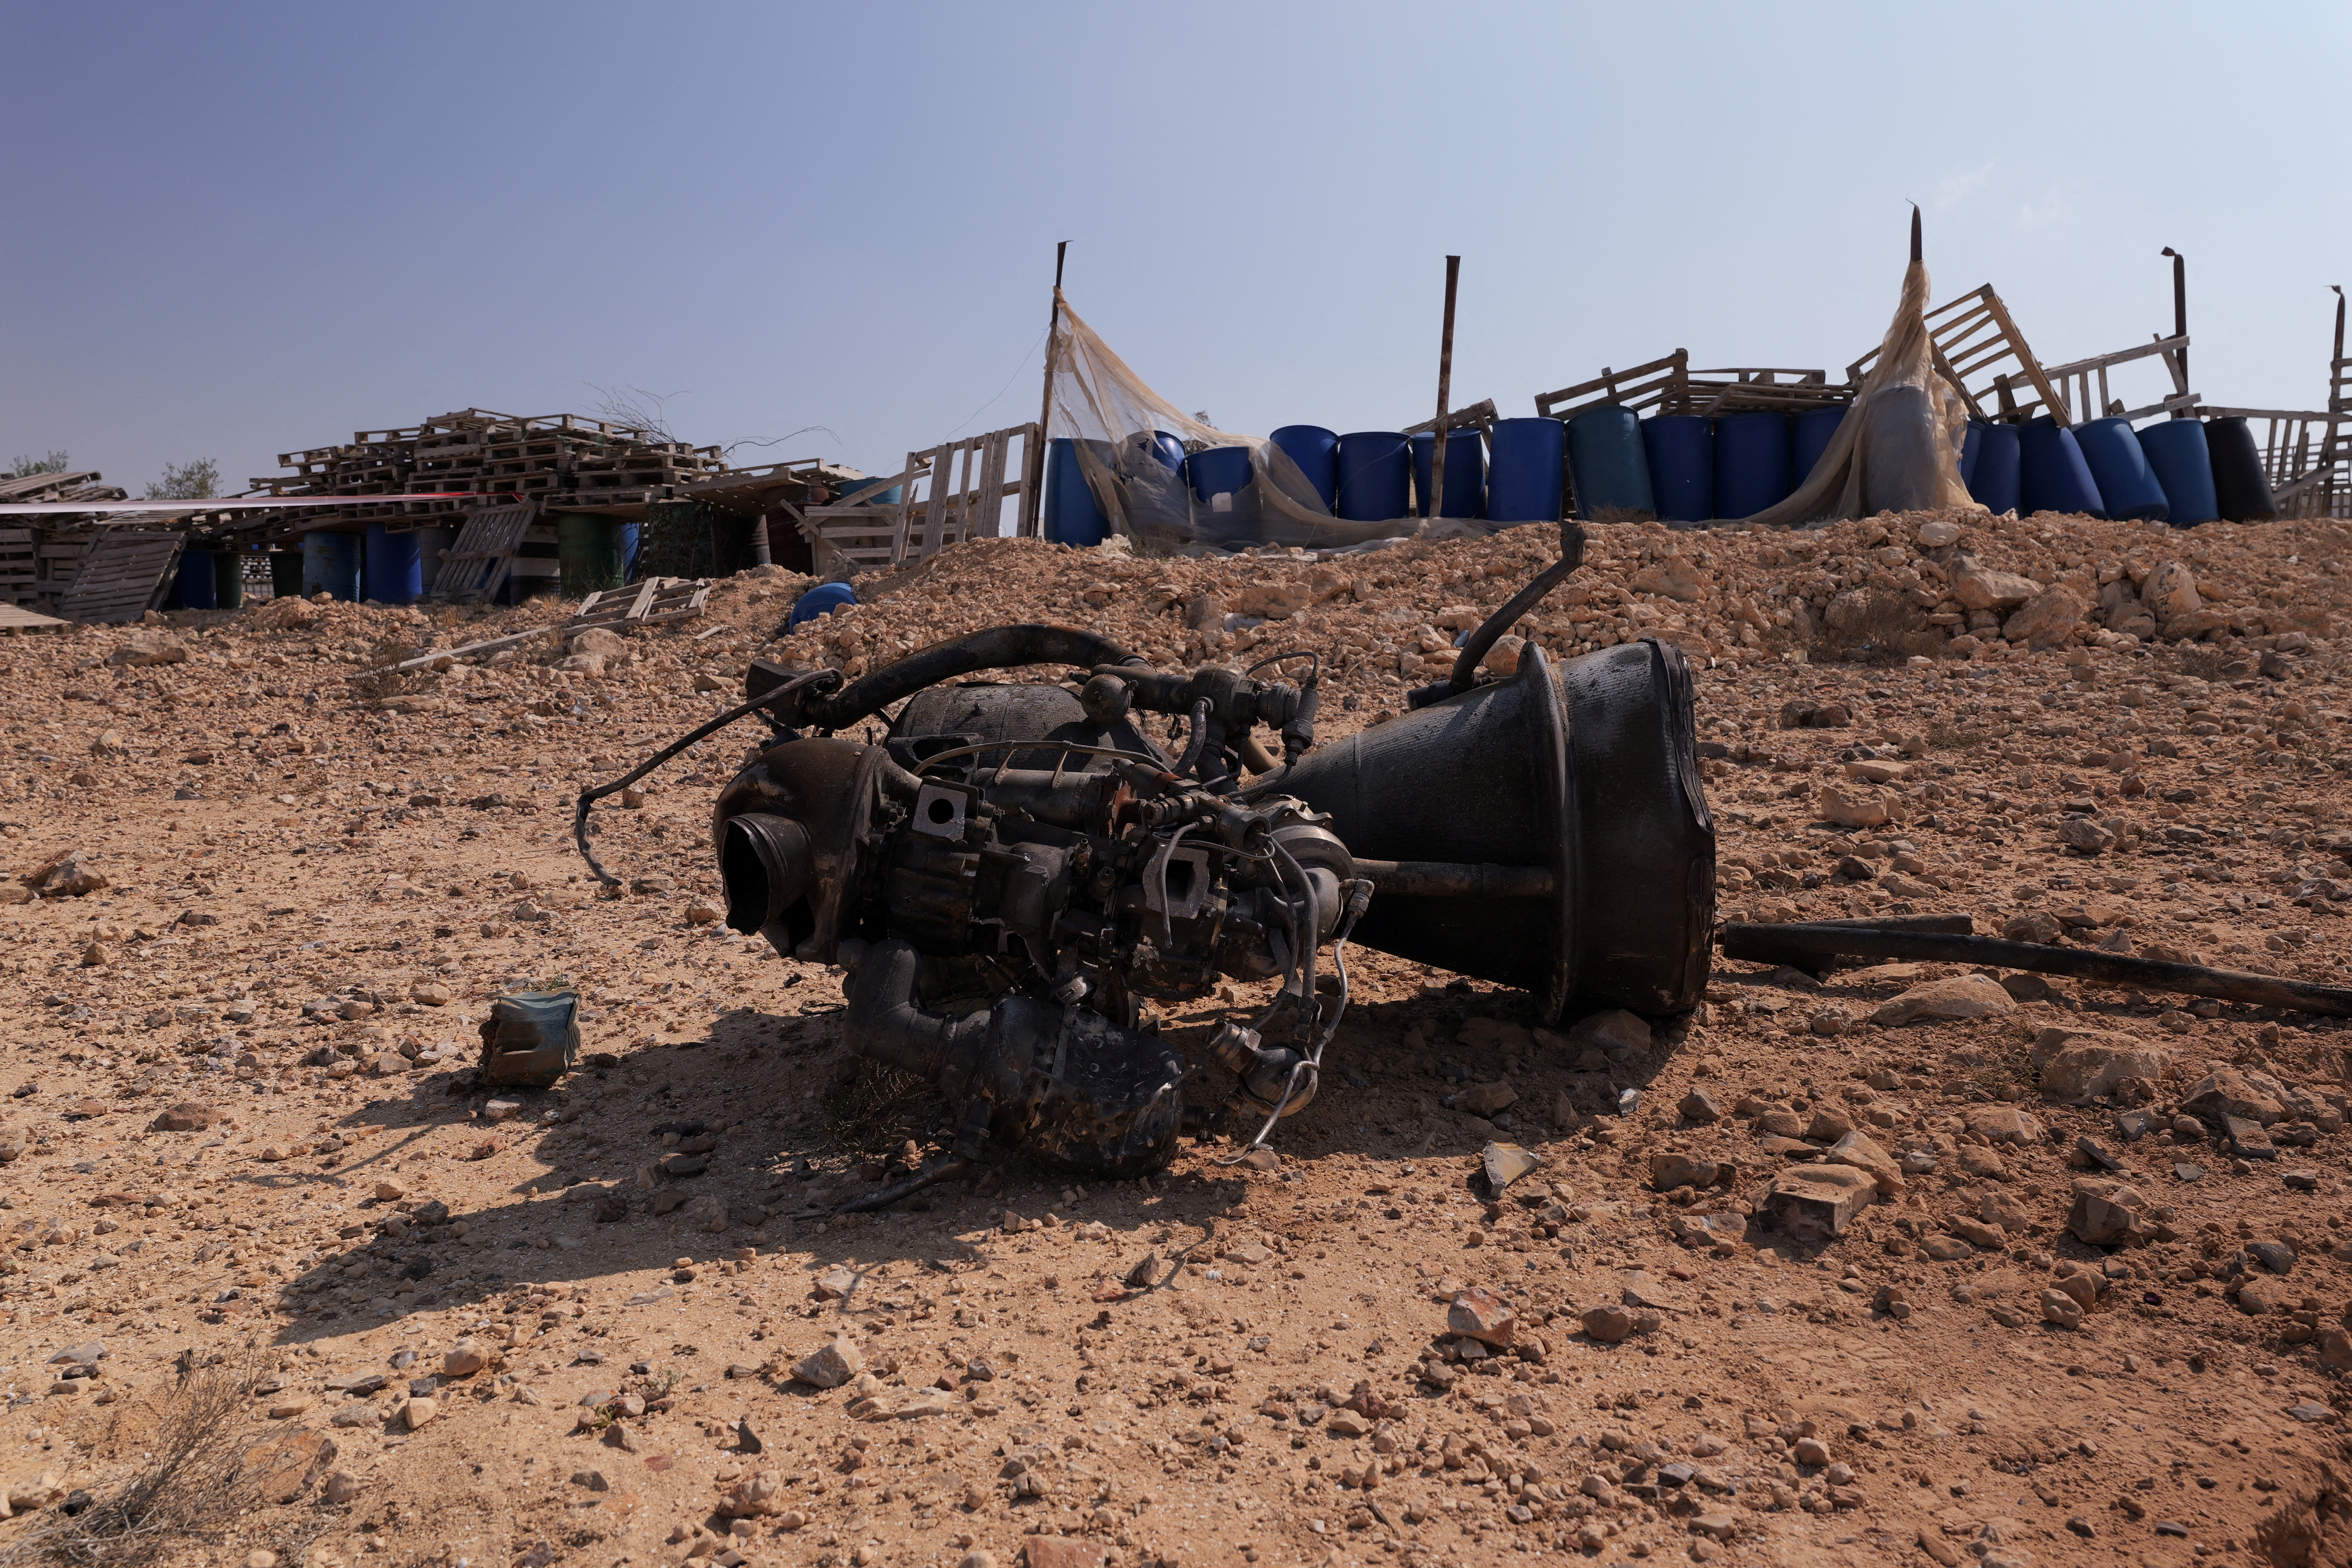 The remains of a rocket booster that, according to Israeli authorities critically injured a 7-year-old girl, after Iran launched drones and missiles towards Israel, near Arad